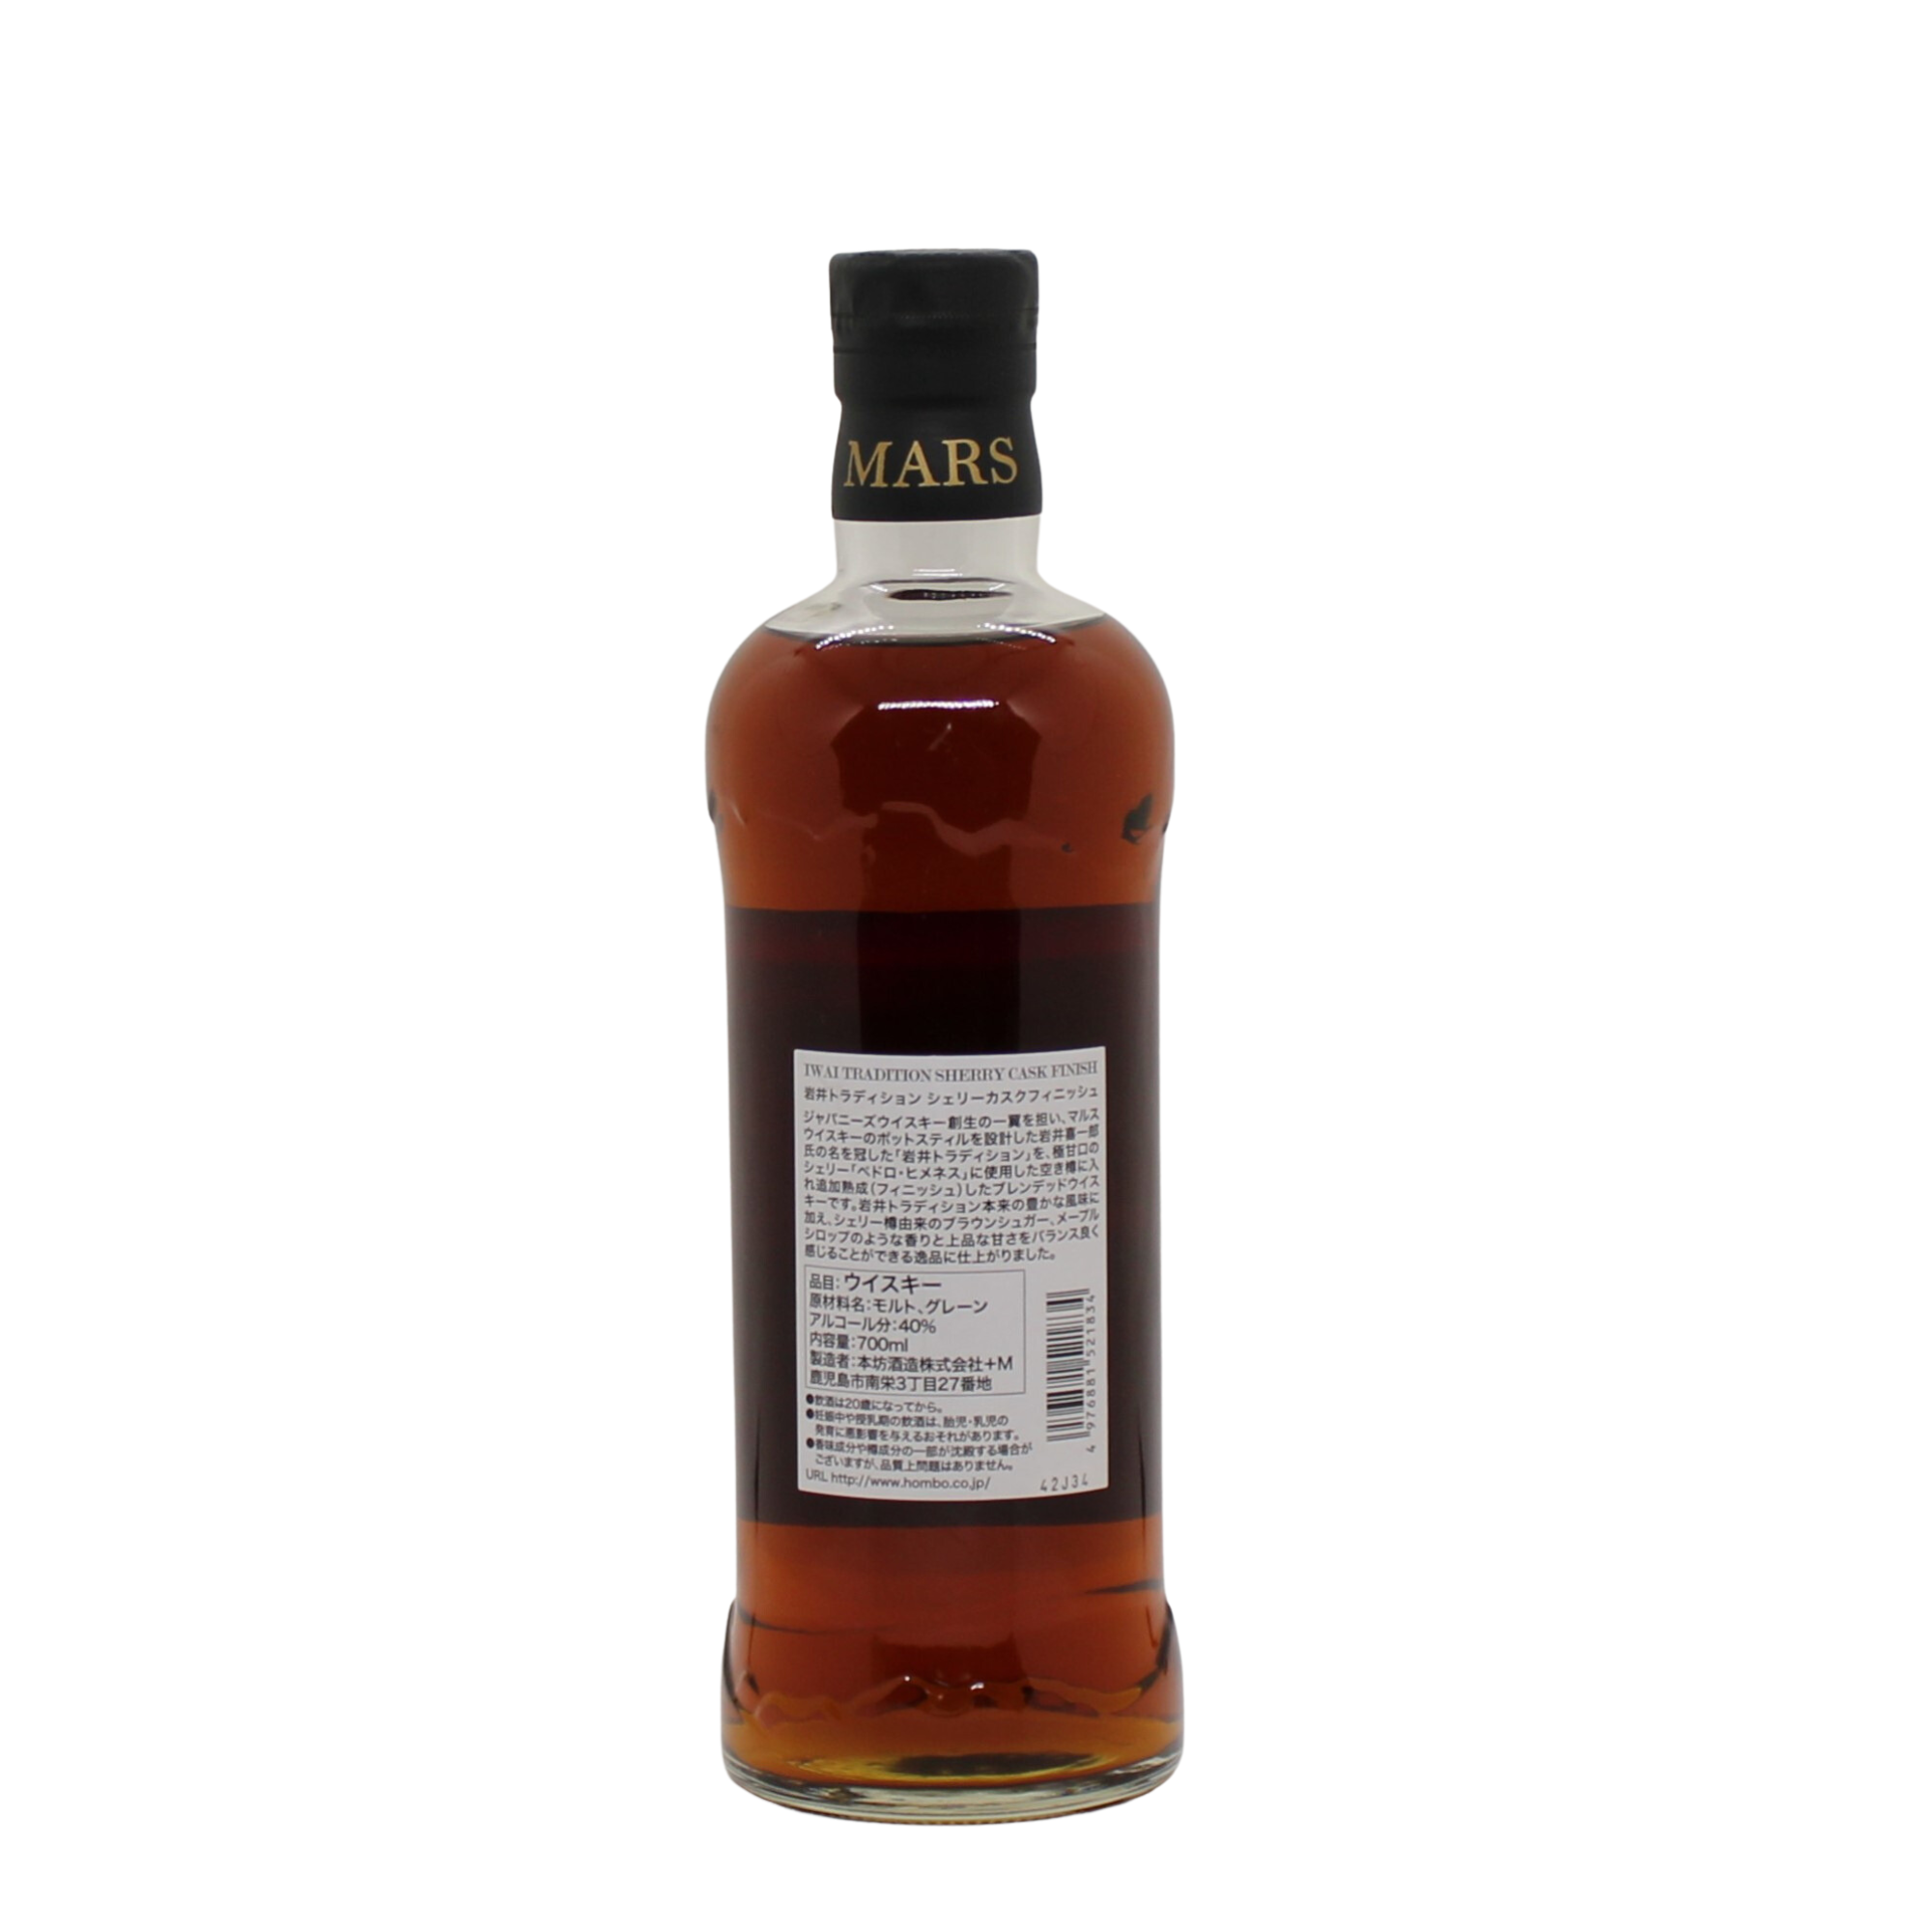 Mars Iwai Tradition Sherry Cask Finish Blended Whisky